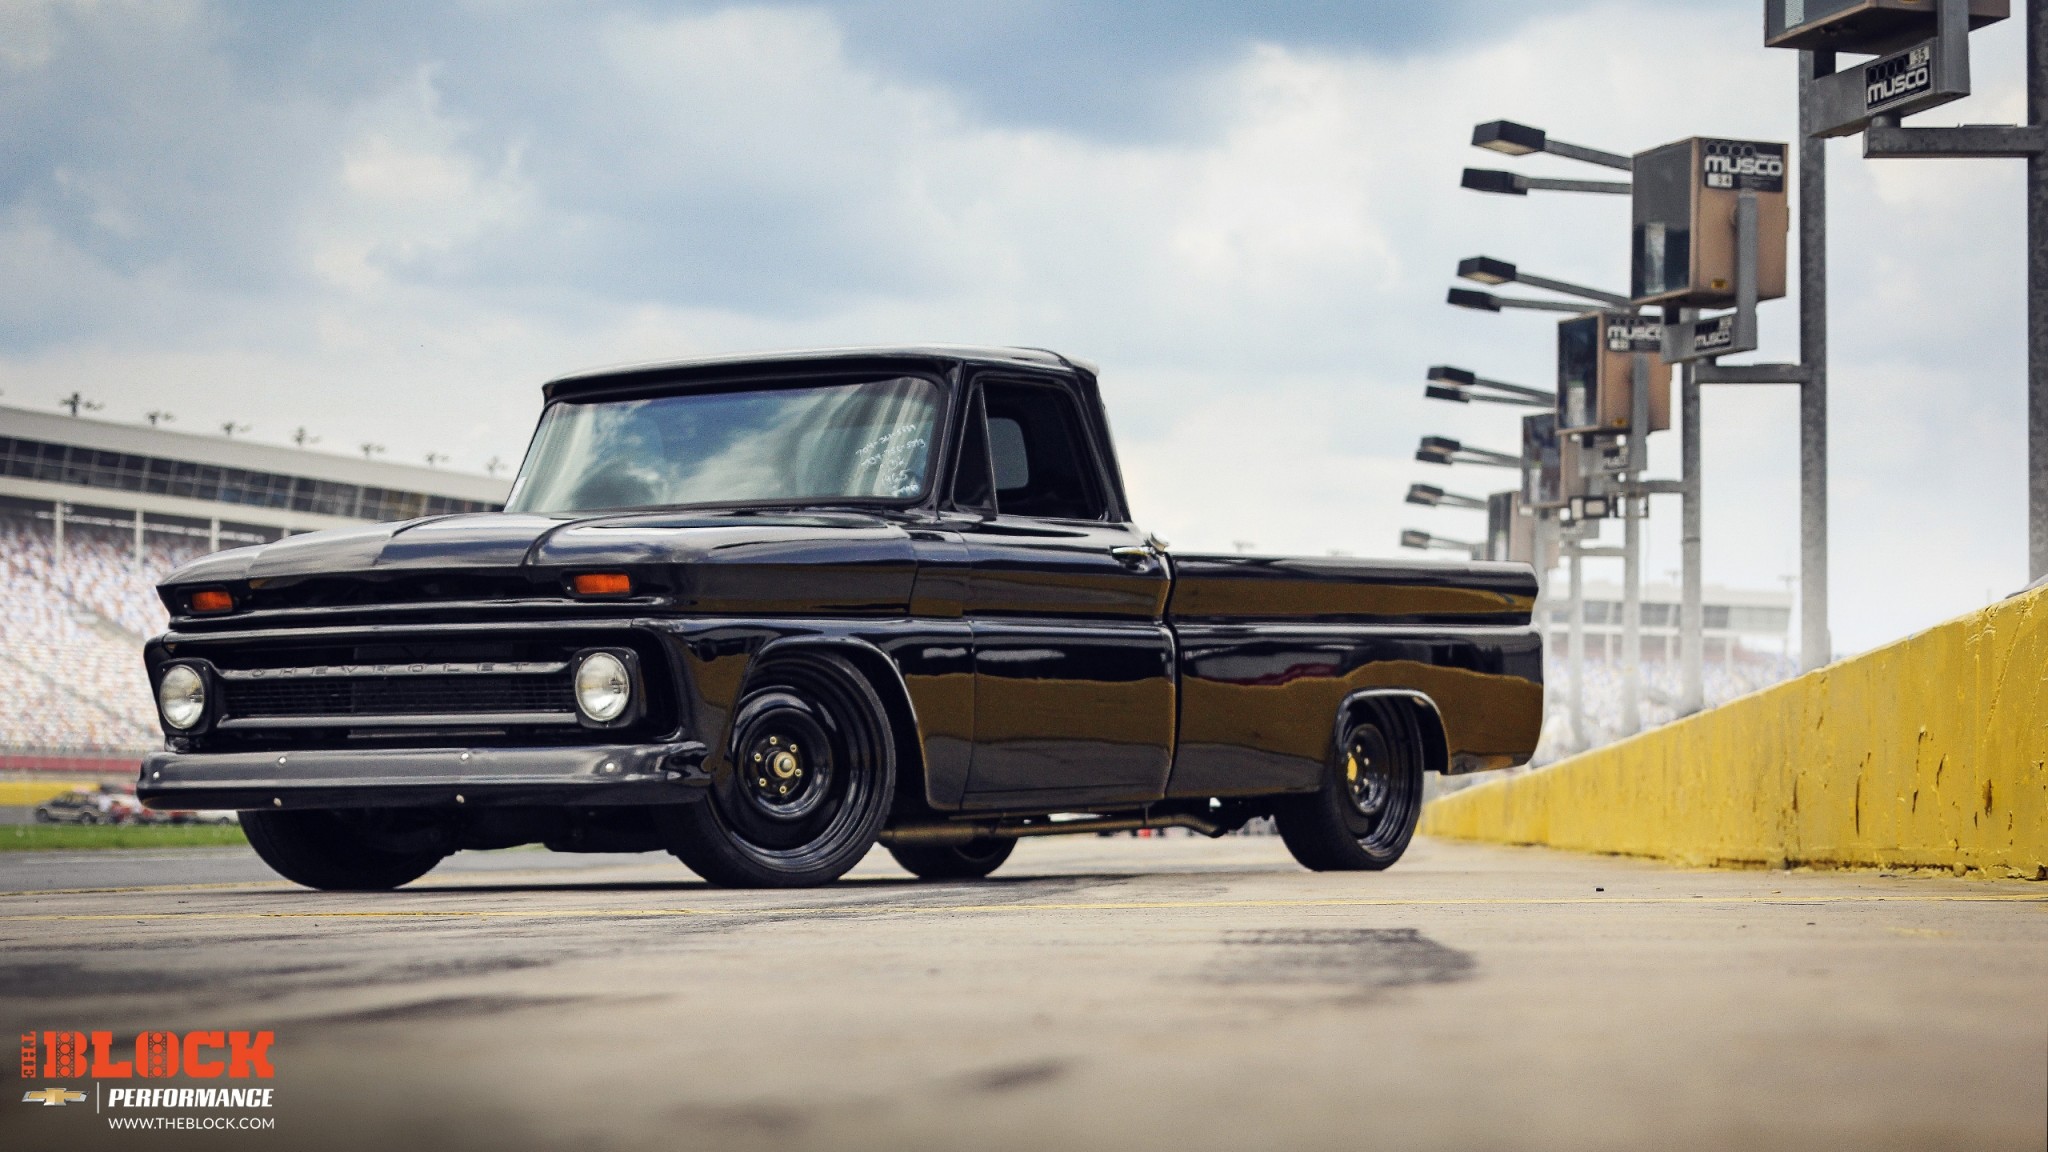 2048x1152 Chevy Truck Wallpaper Wallpapers) – Wallpapers and Backgrounds